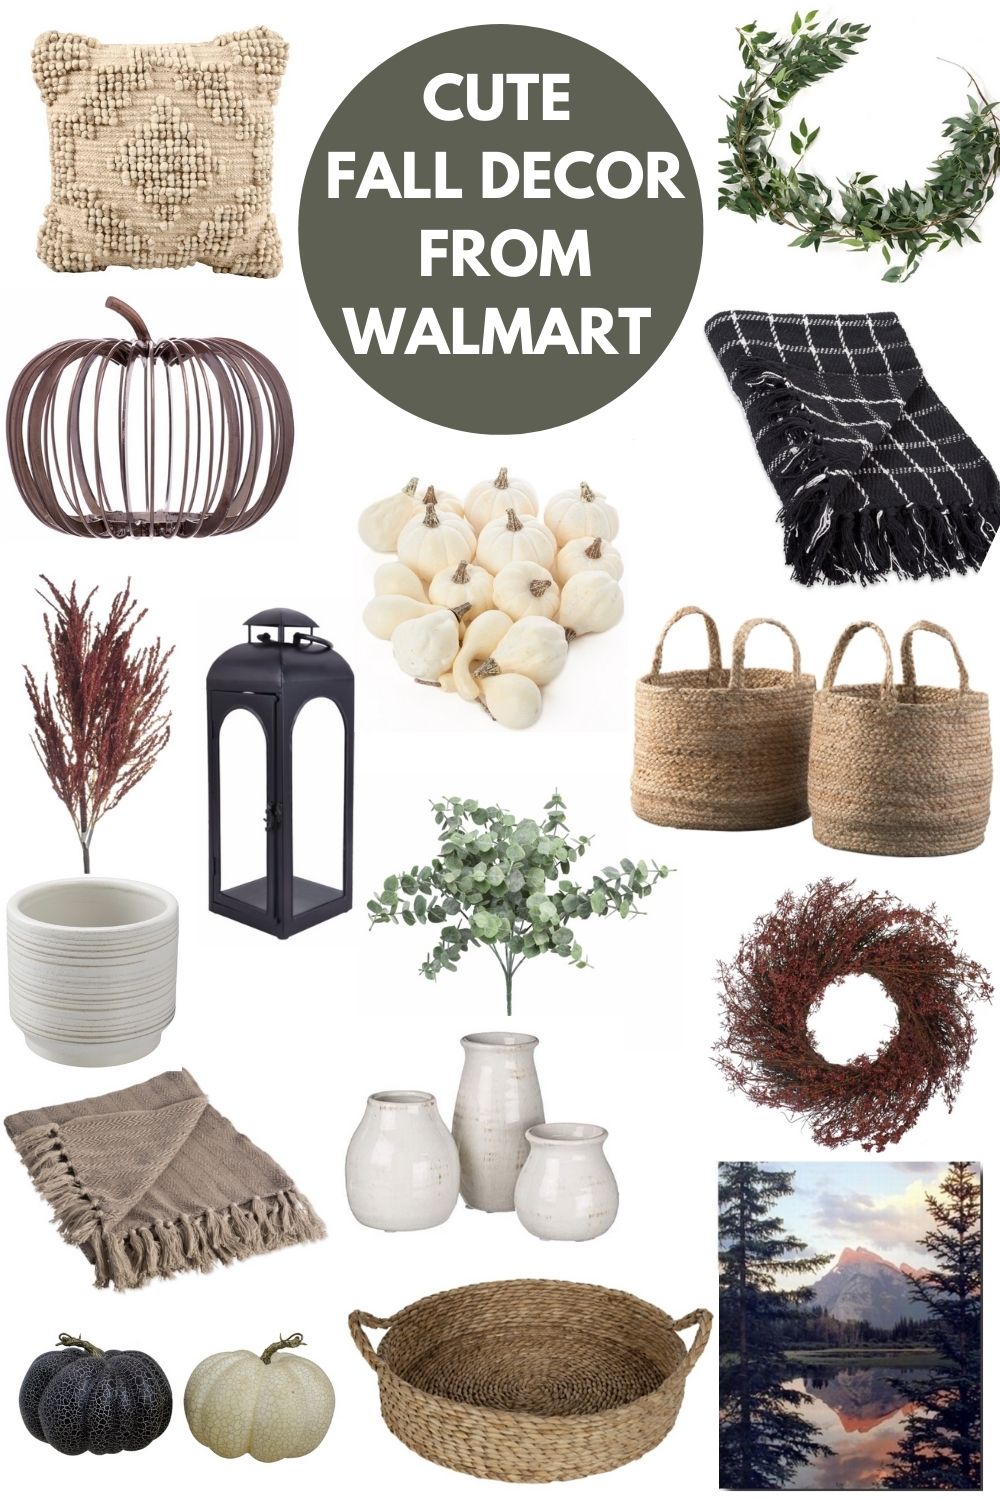 Love these cute, budget-friendly fall decor options from Walmart! #falldecor